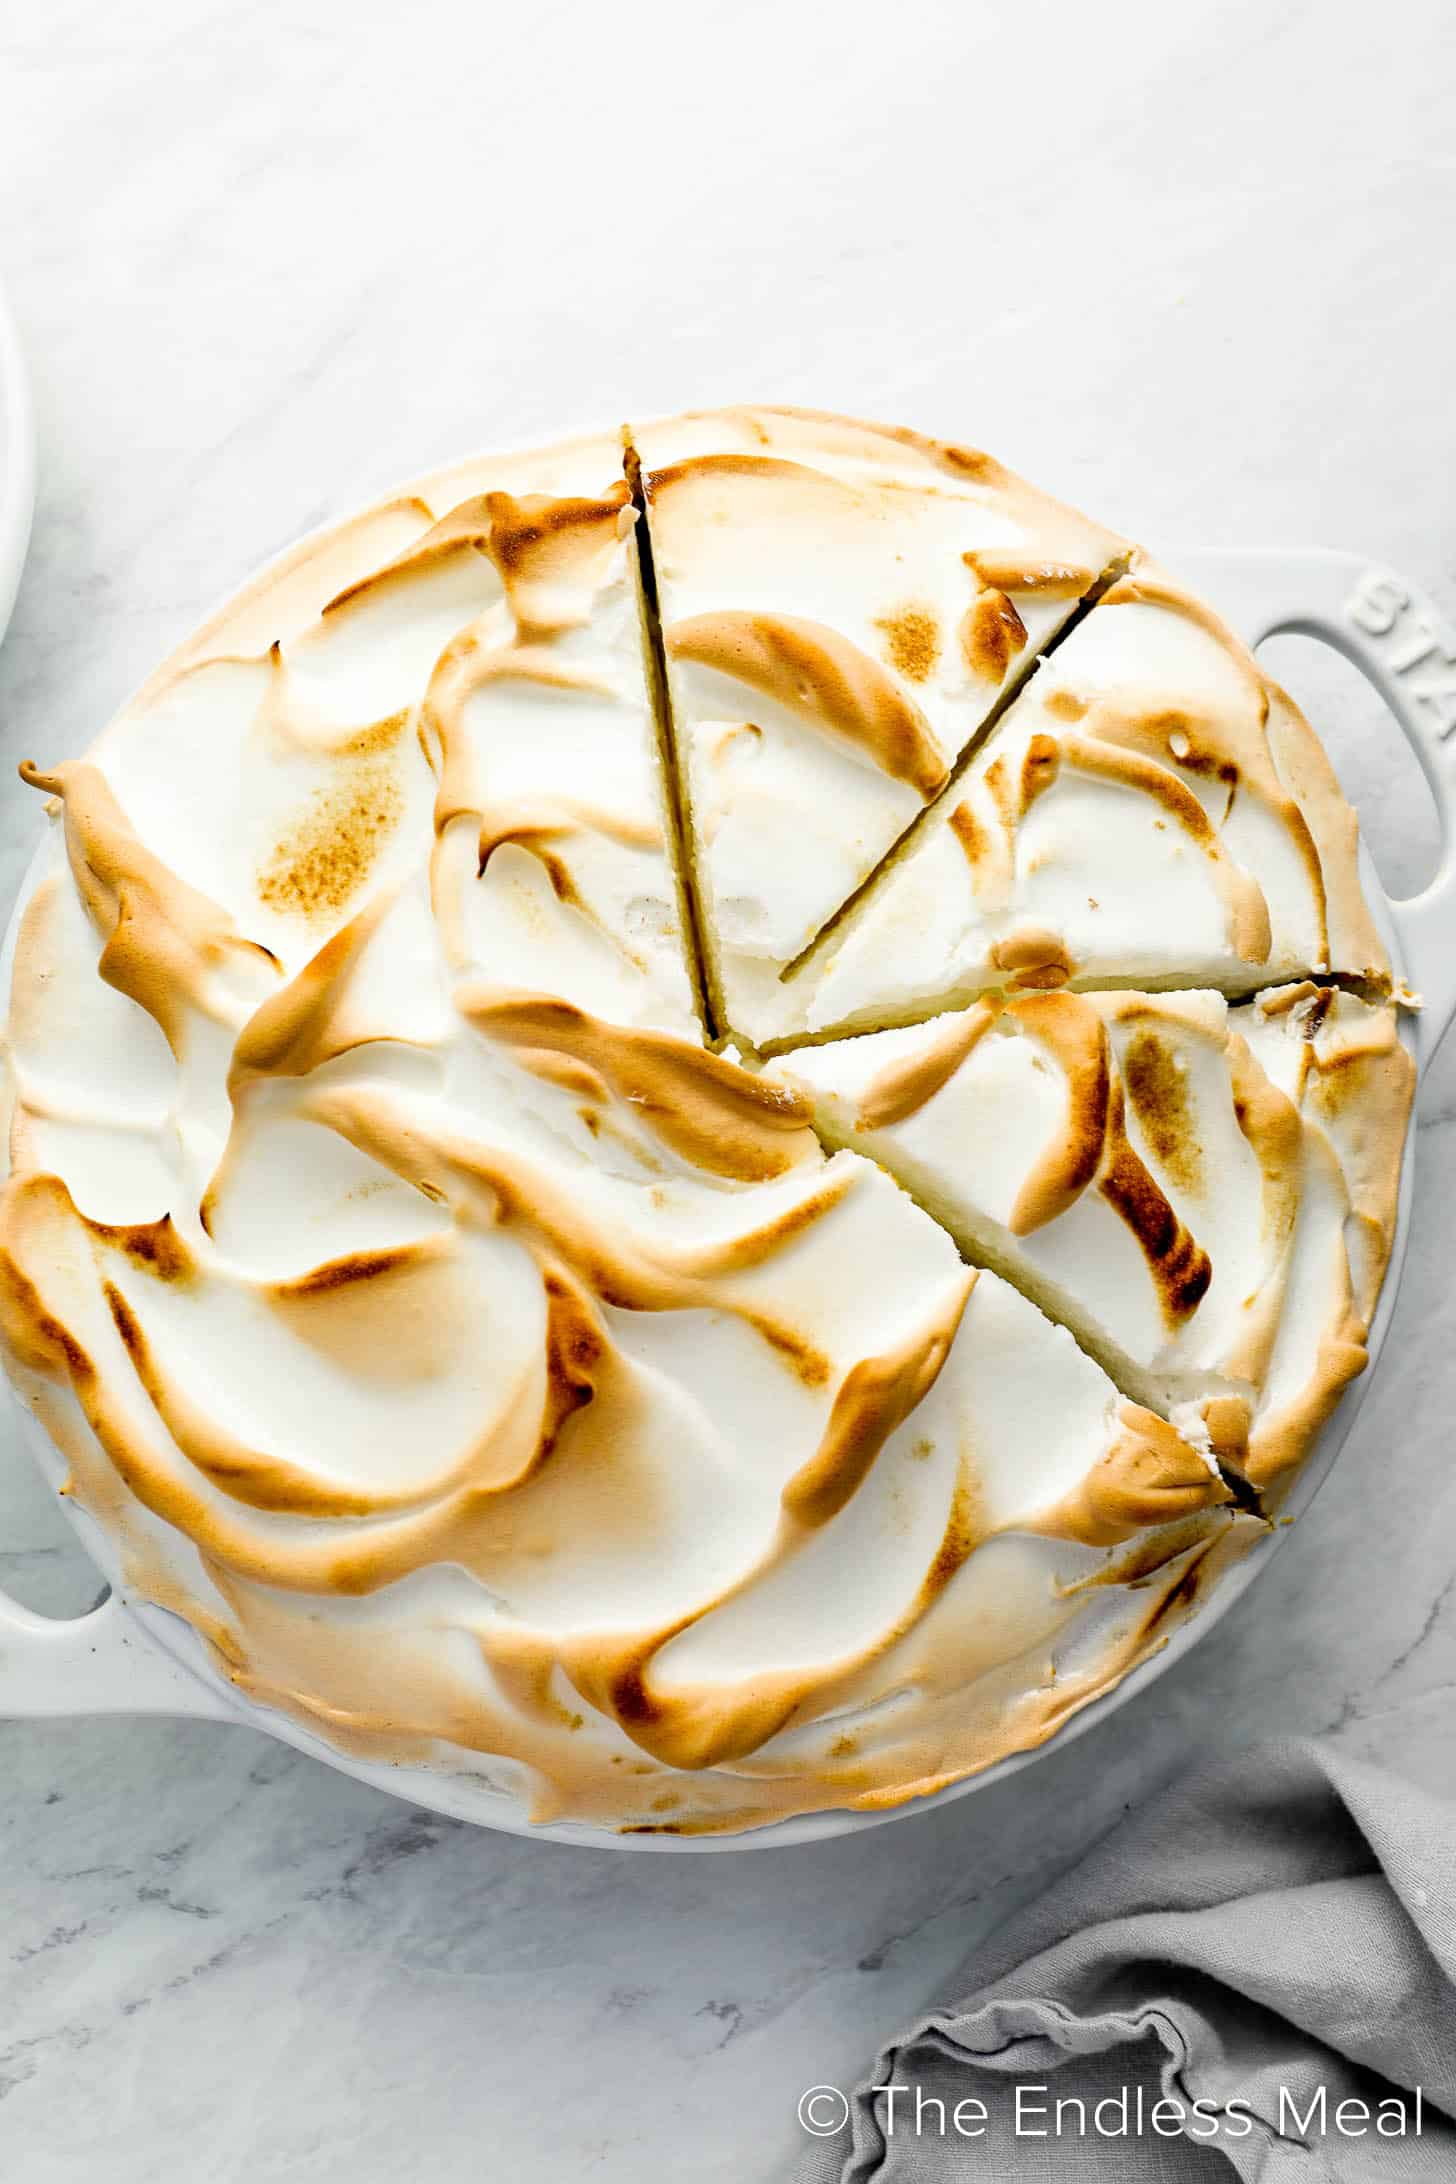 An Easy Lemon Meringue Pie hot out of the oven